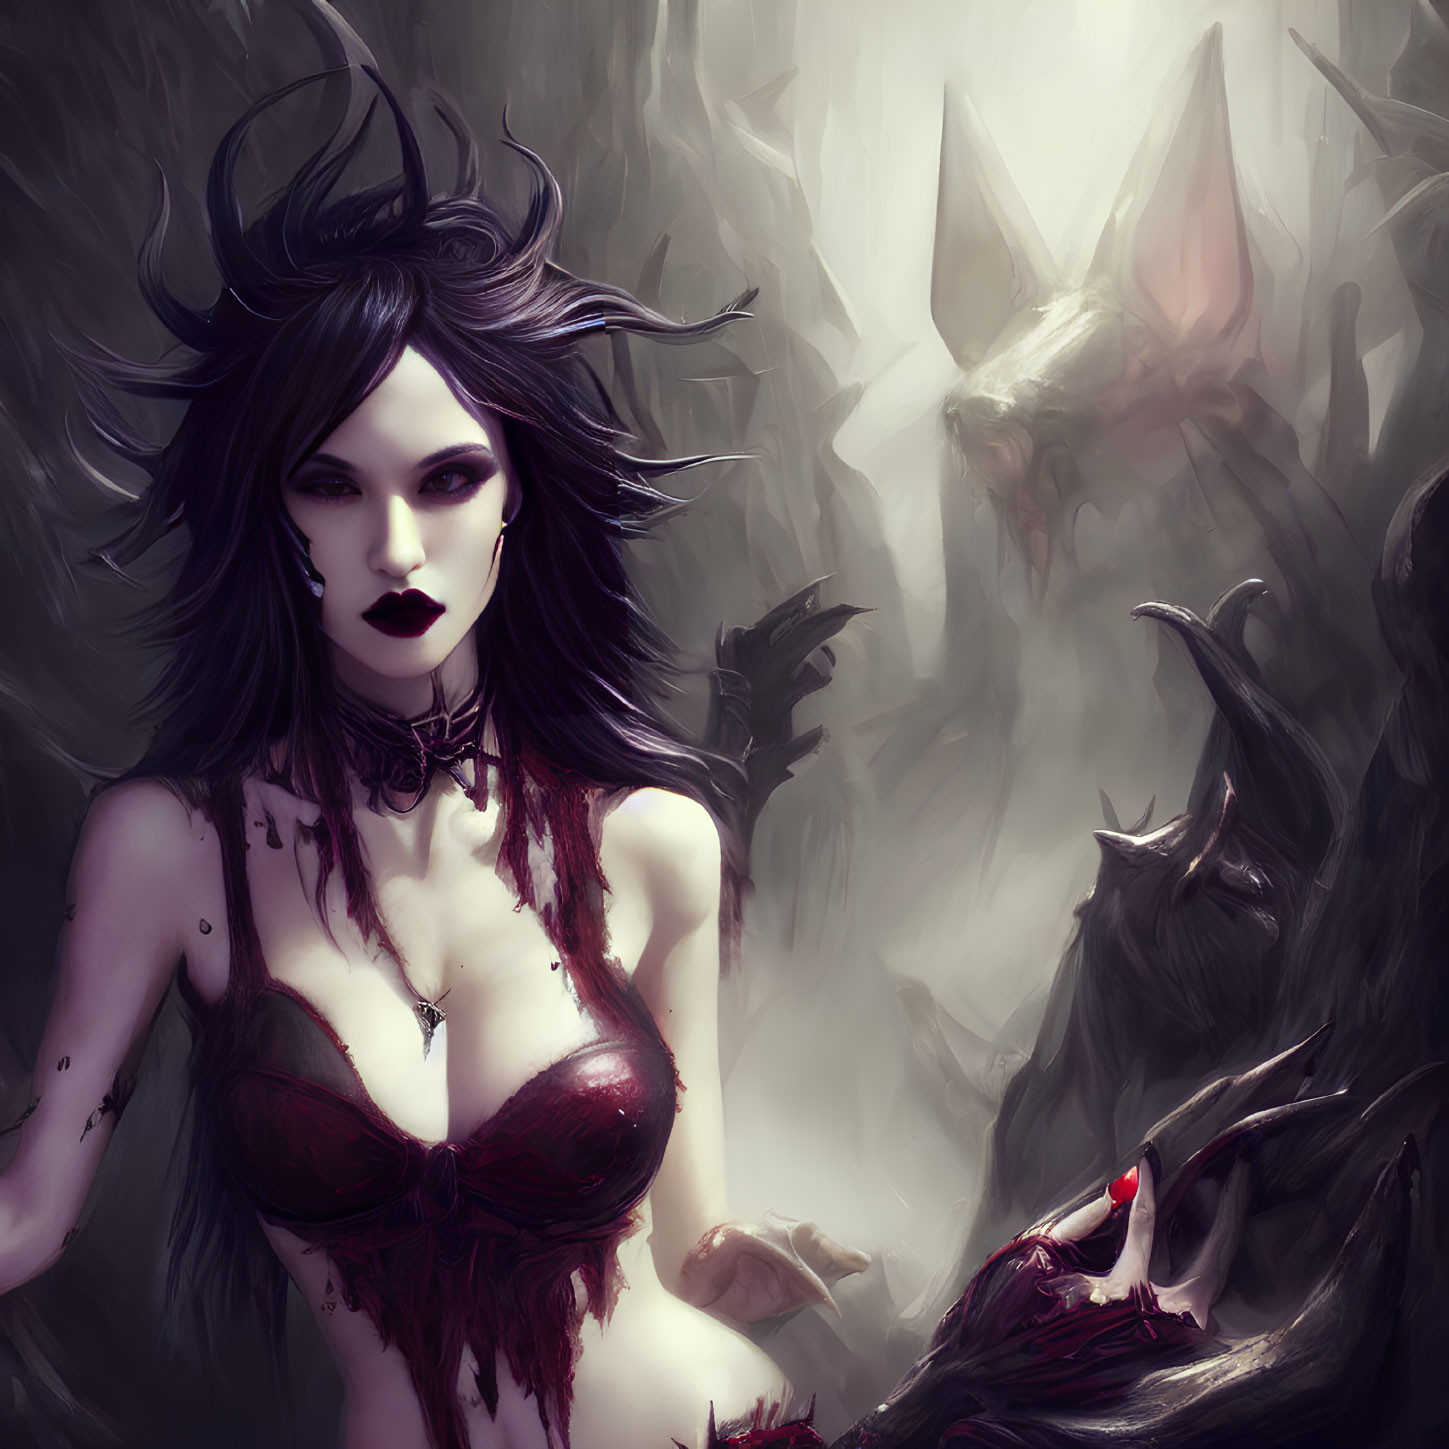 Dark-haired woman in red attire with monstrous shadow.